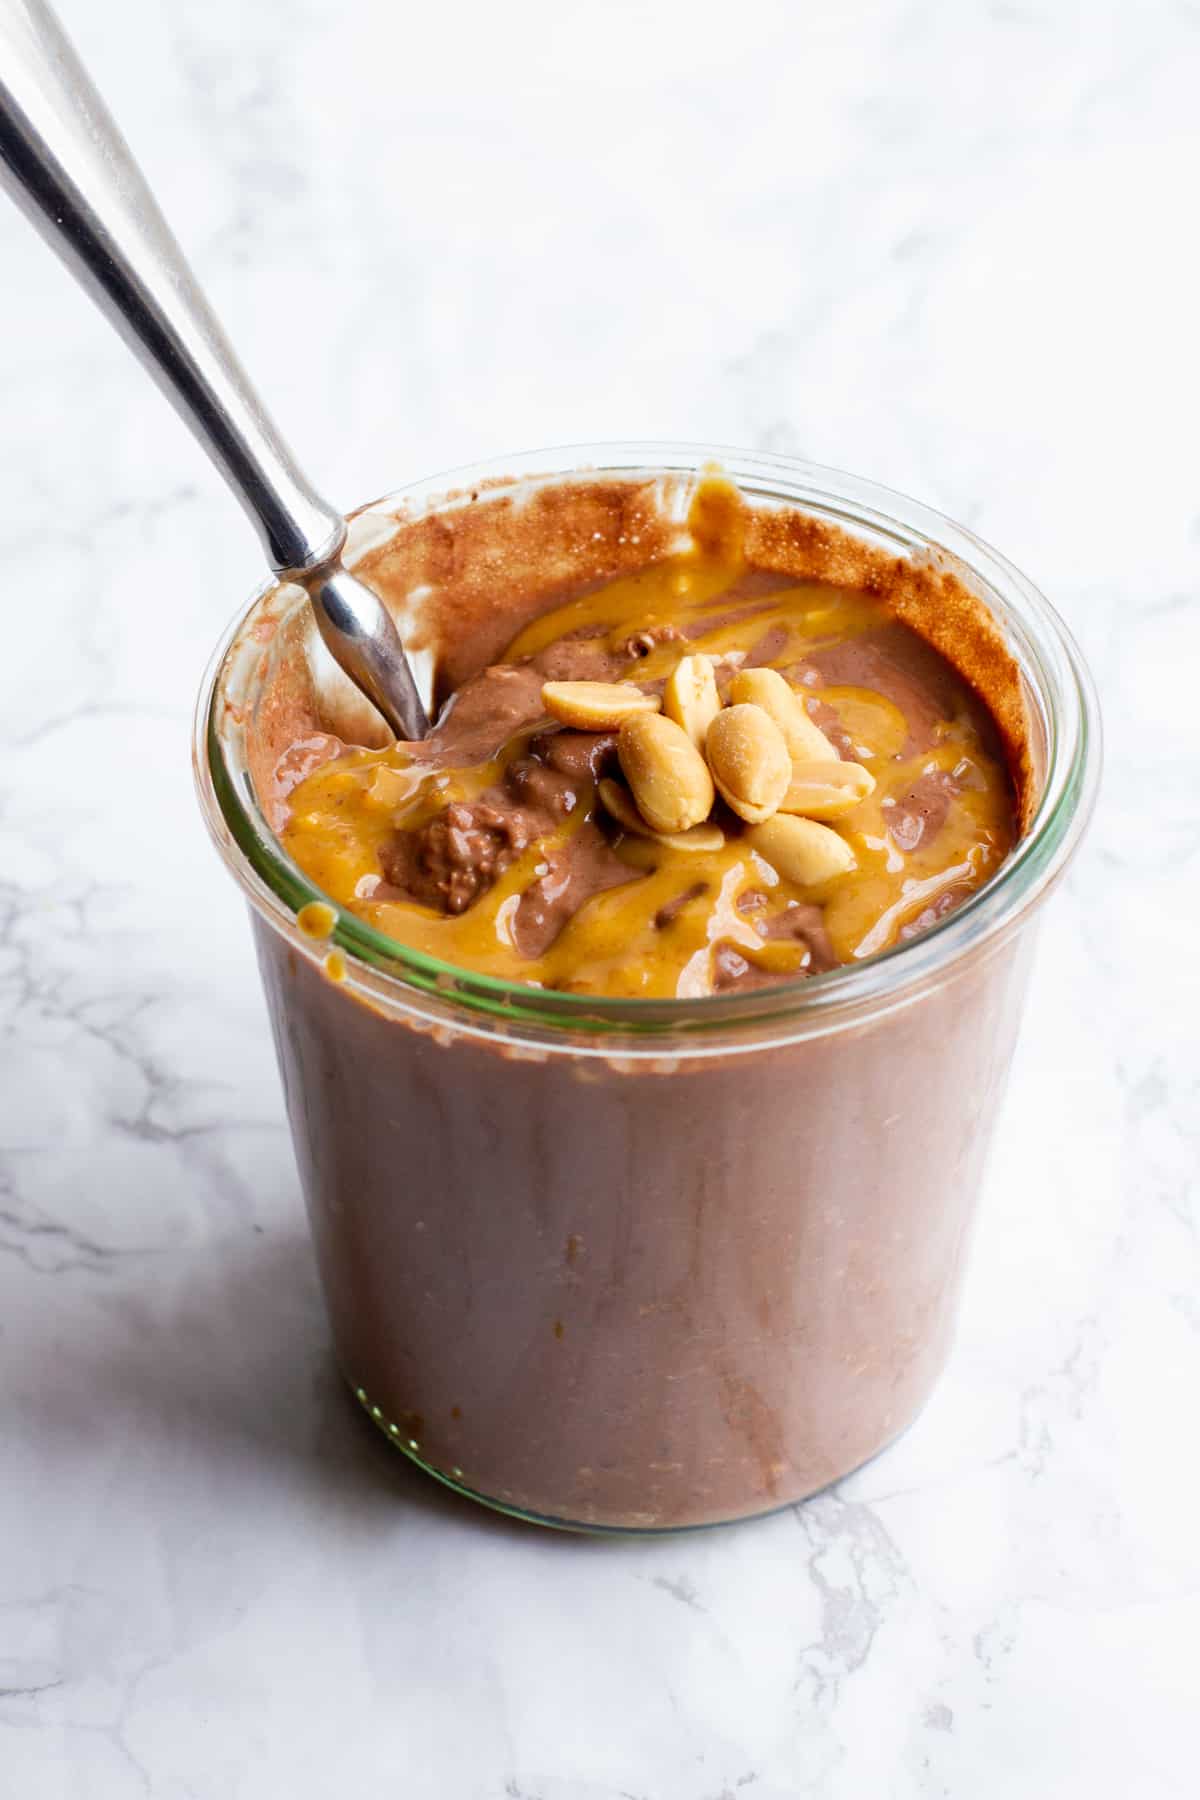 How to Make Healthy Chocolate Peanut Butter Overnight Oats